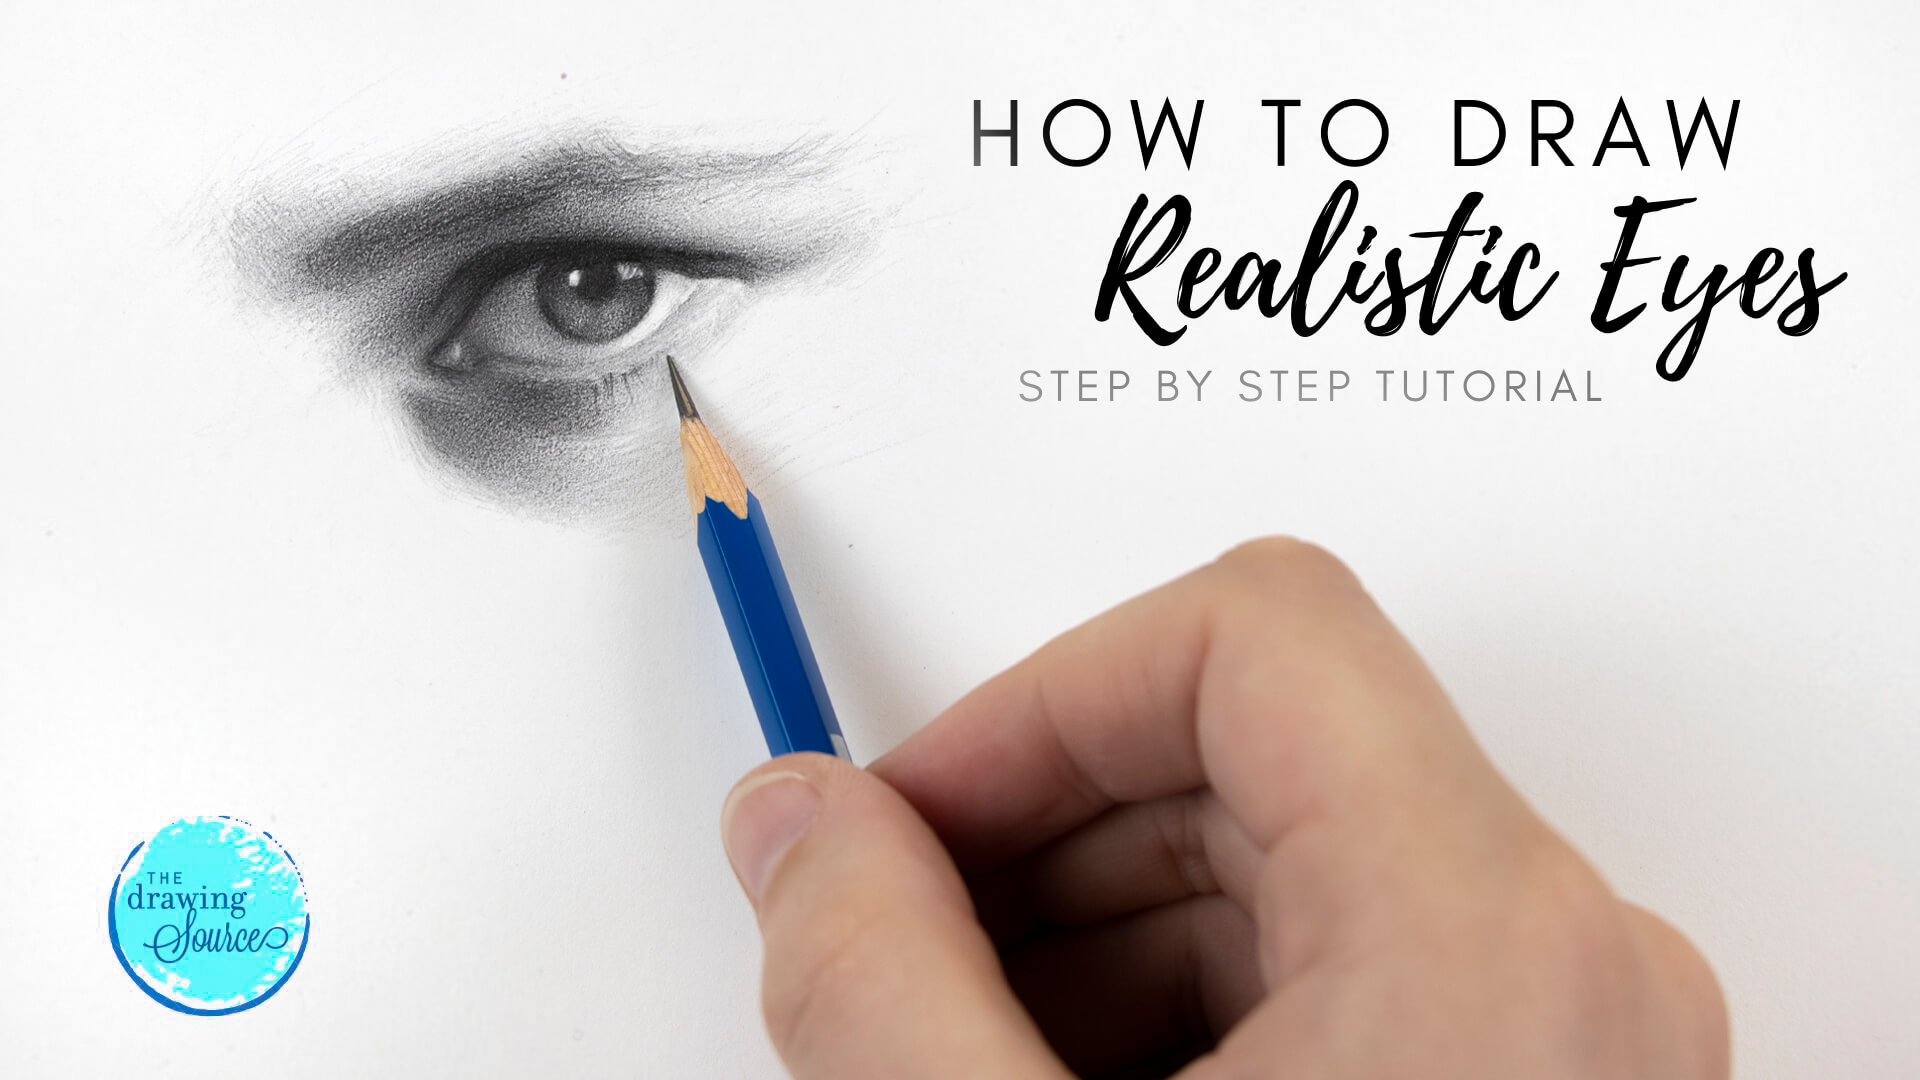 How to Draw Realistic Eyes: A Step by Step Tutorial